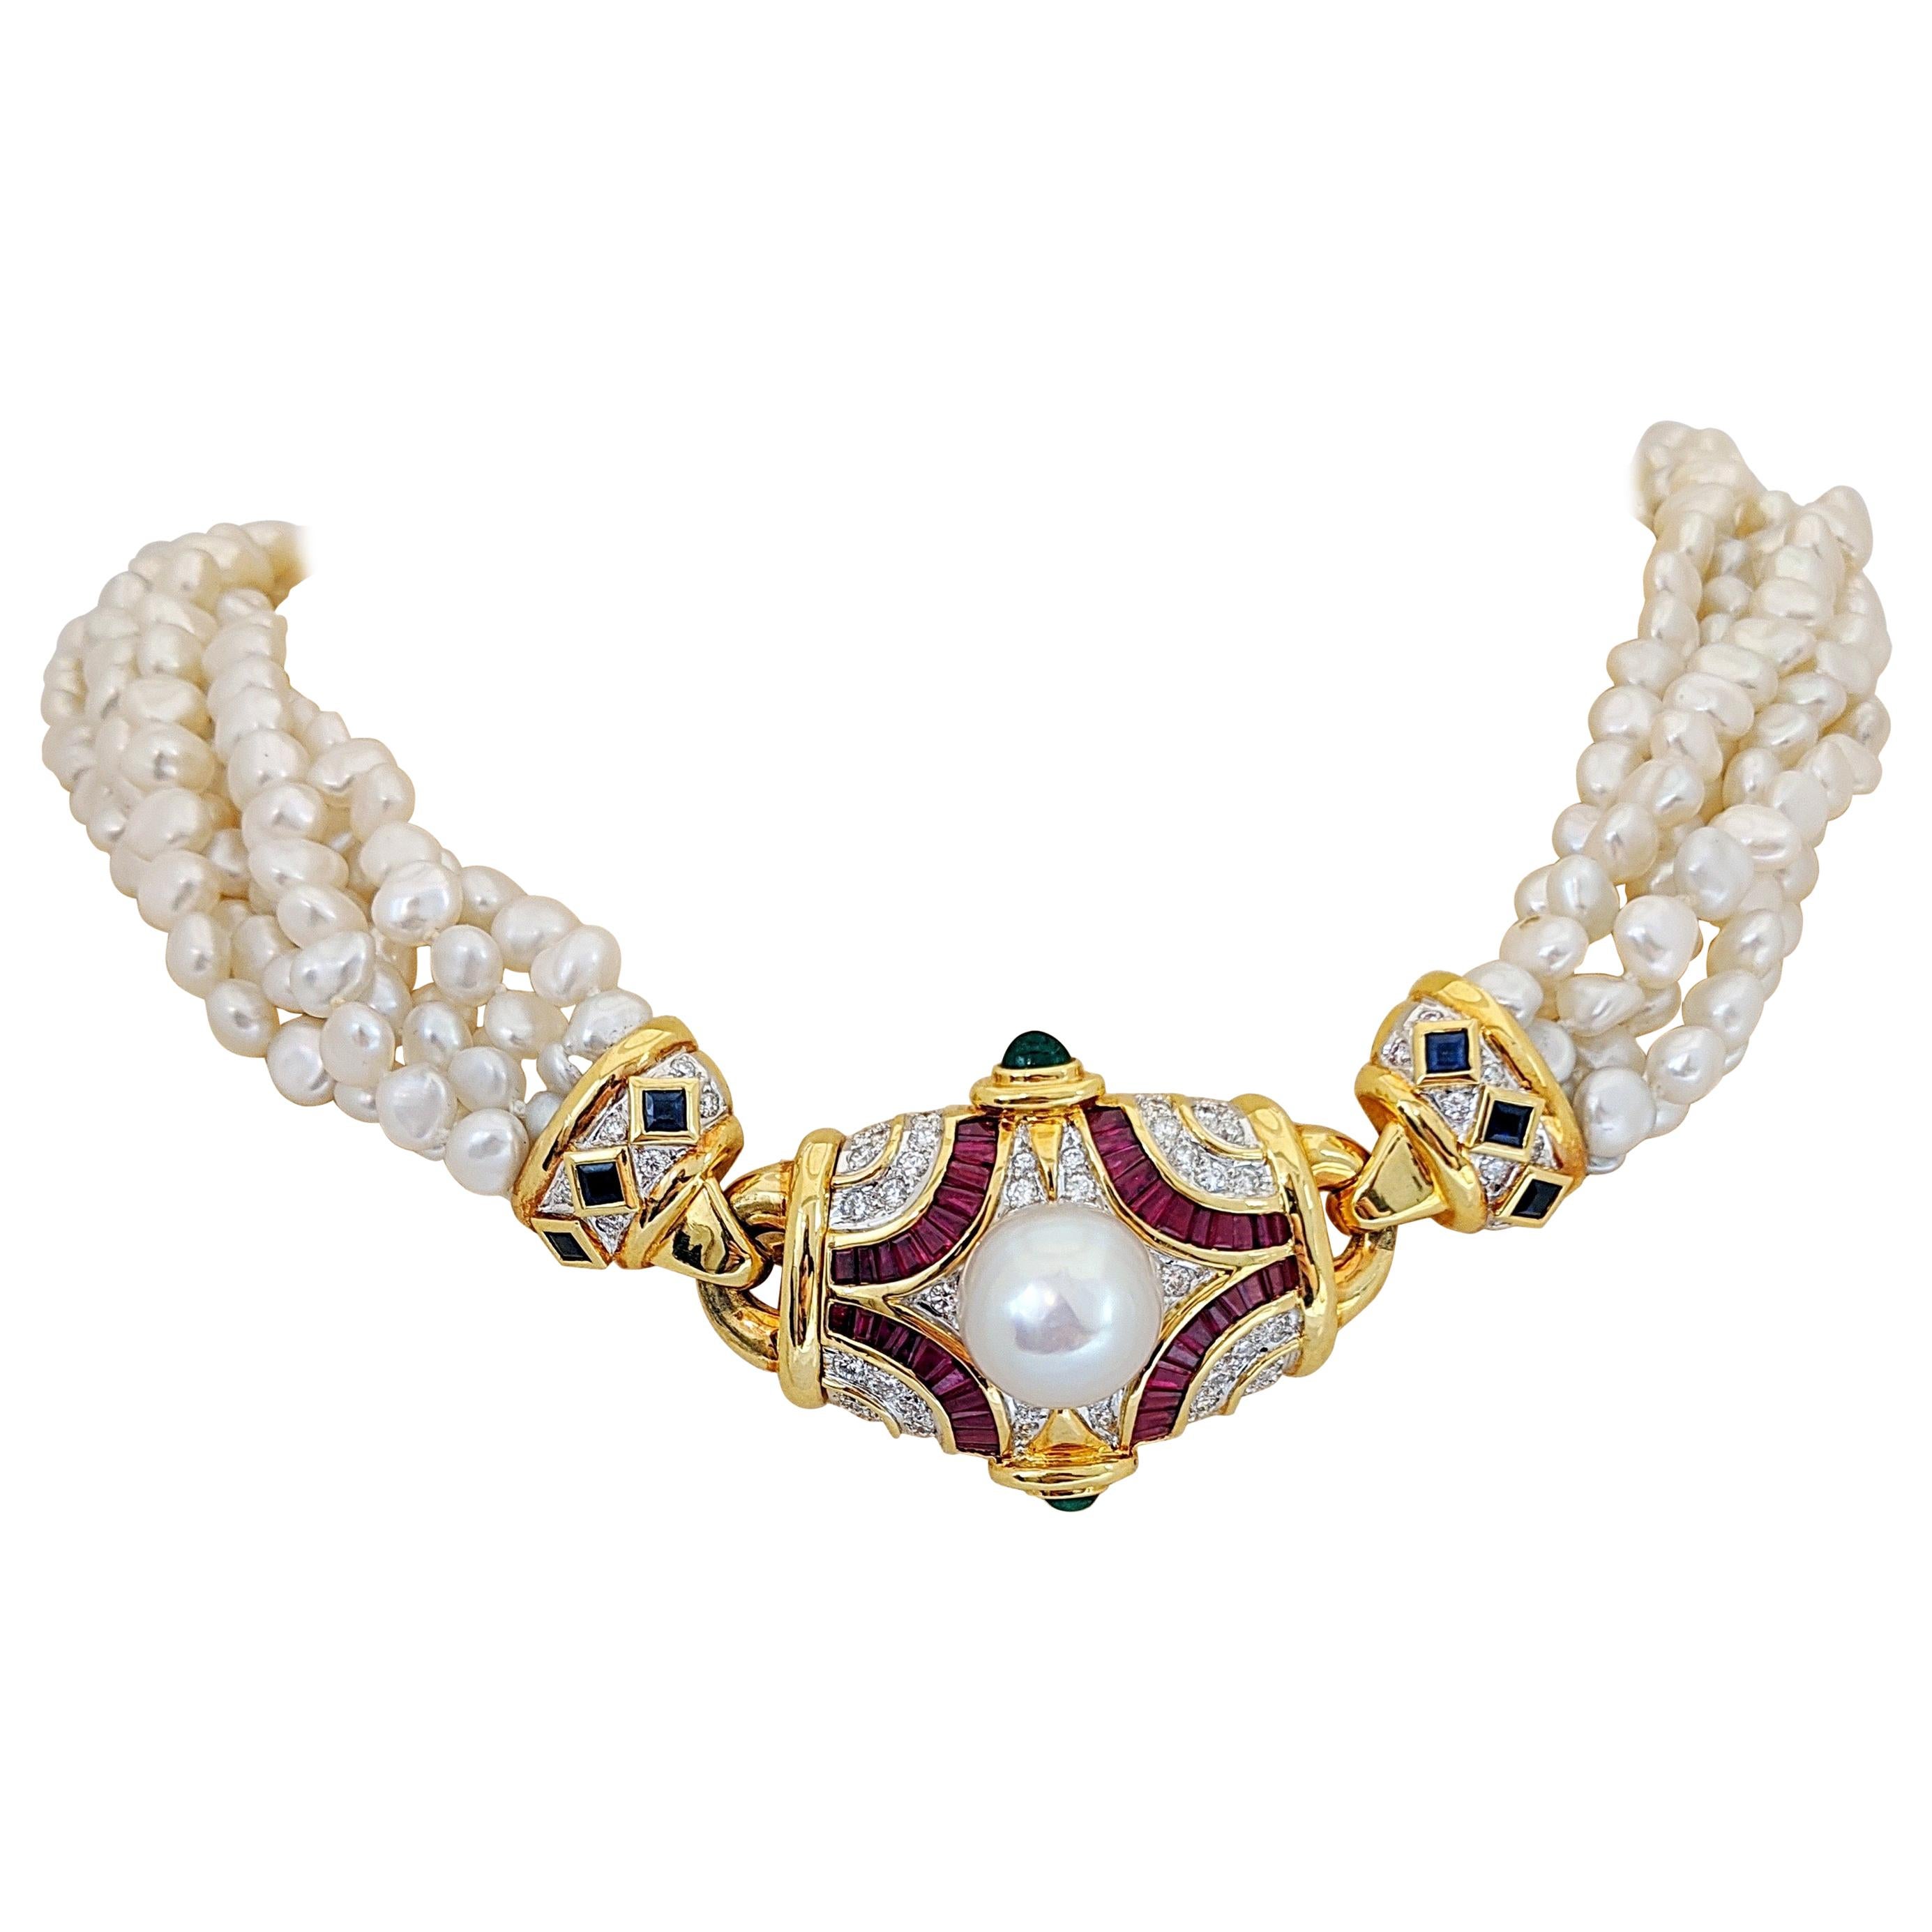 Six Strand Pearl Necklace with Diamond, Ruby, Emerald, and Blue Sapphire Center